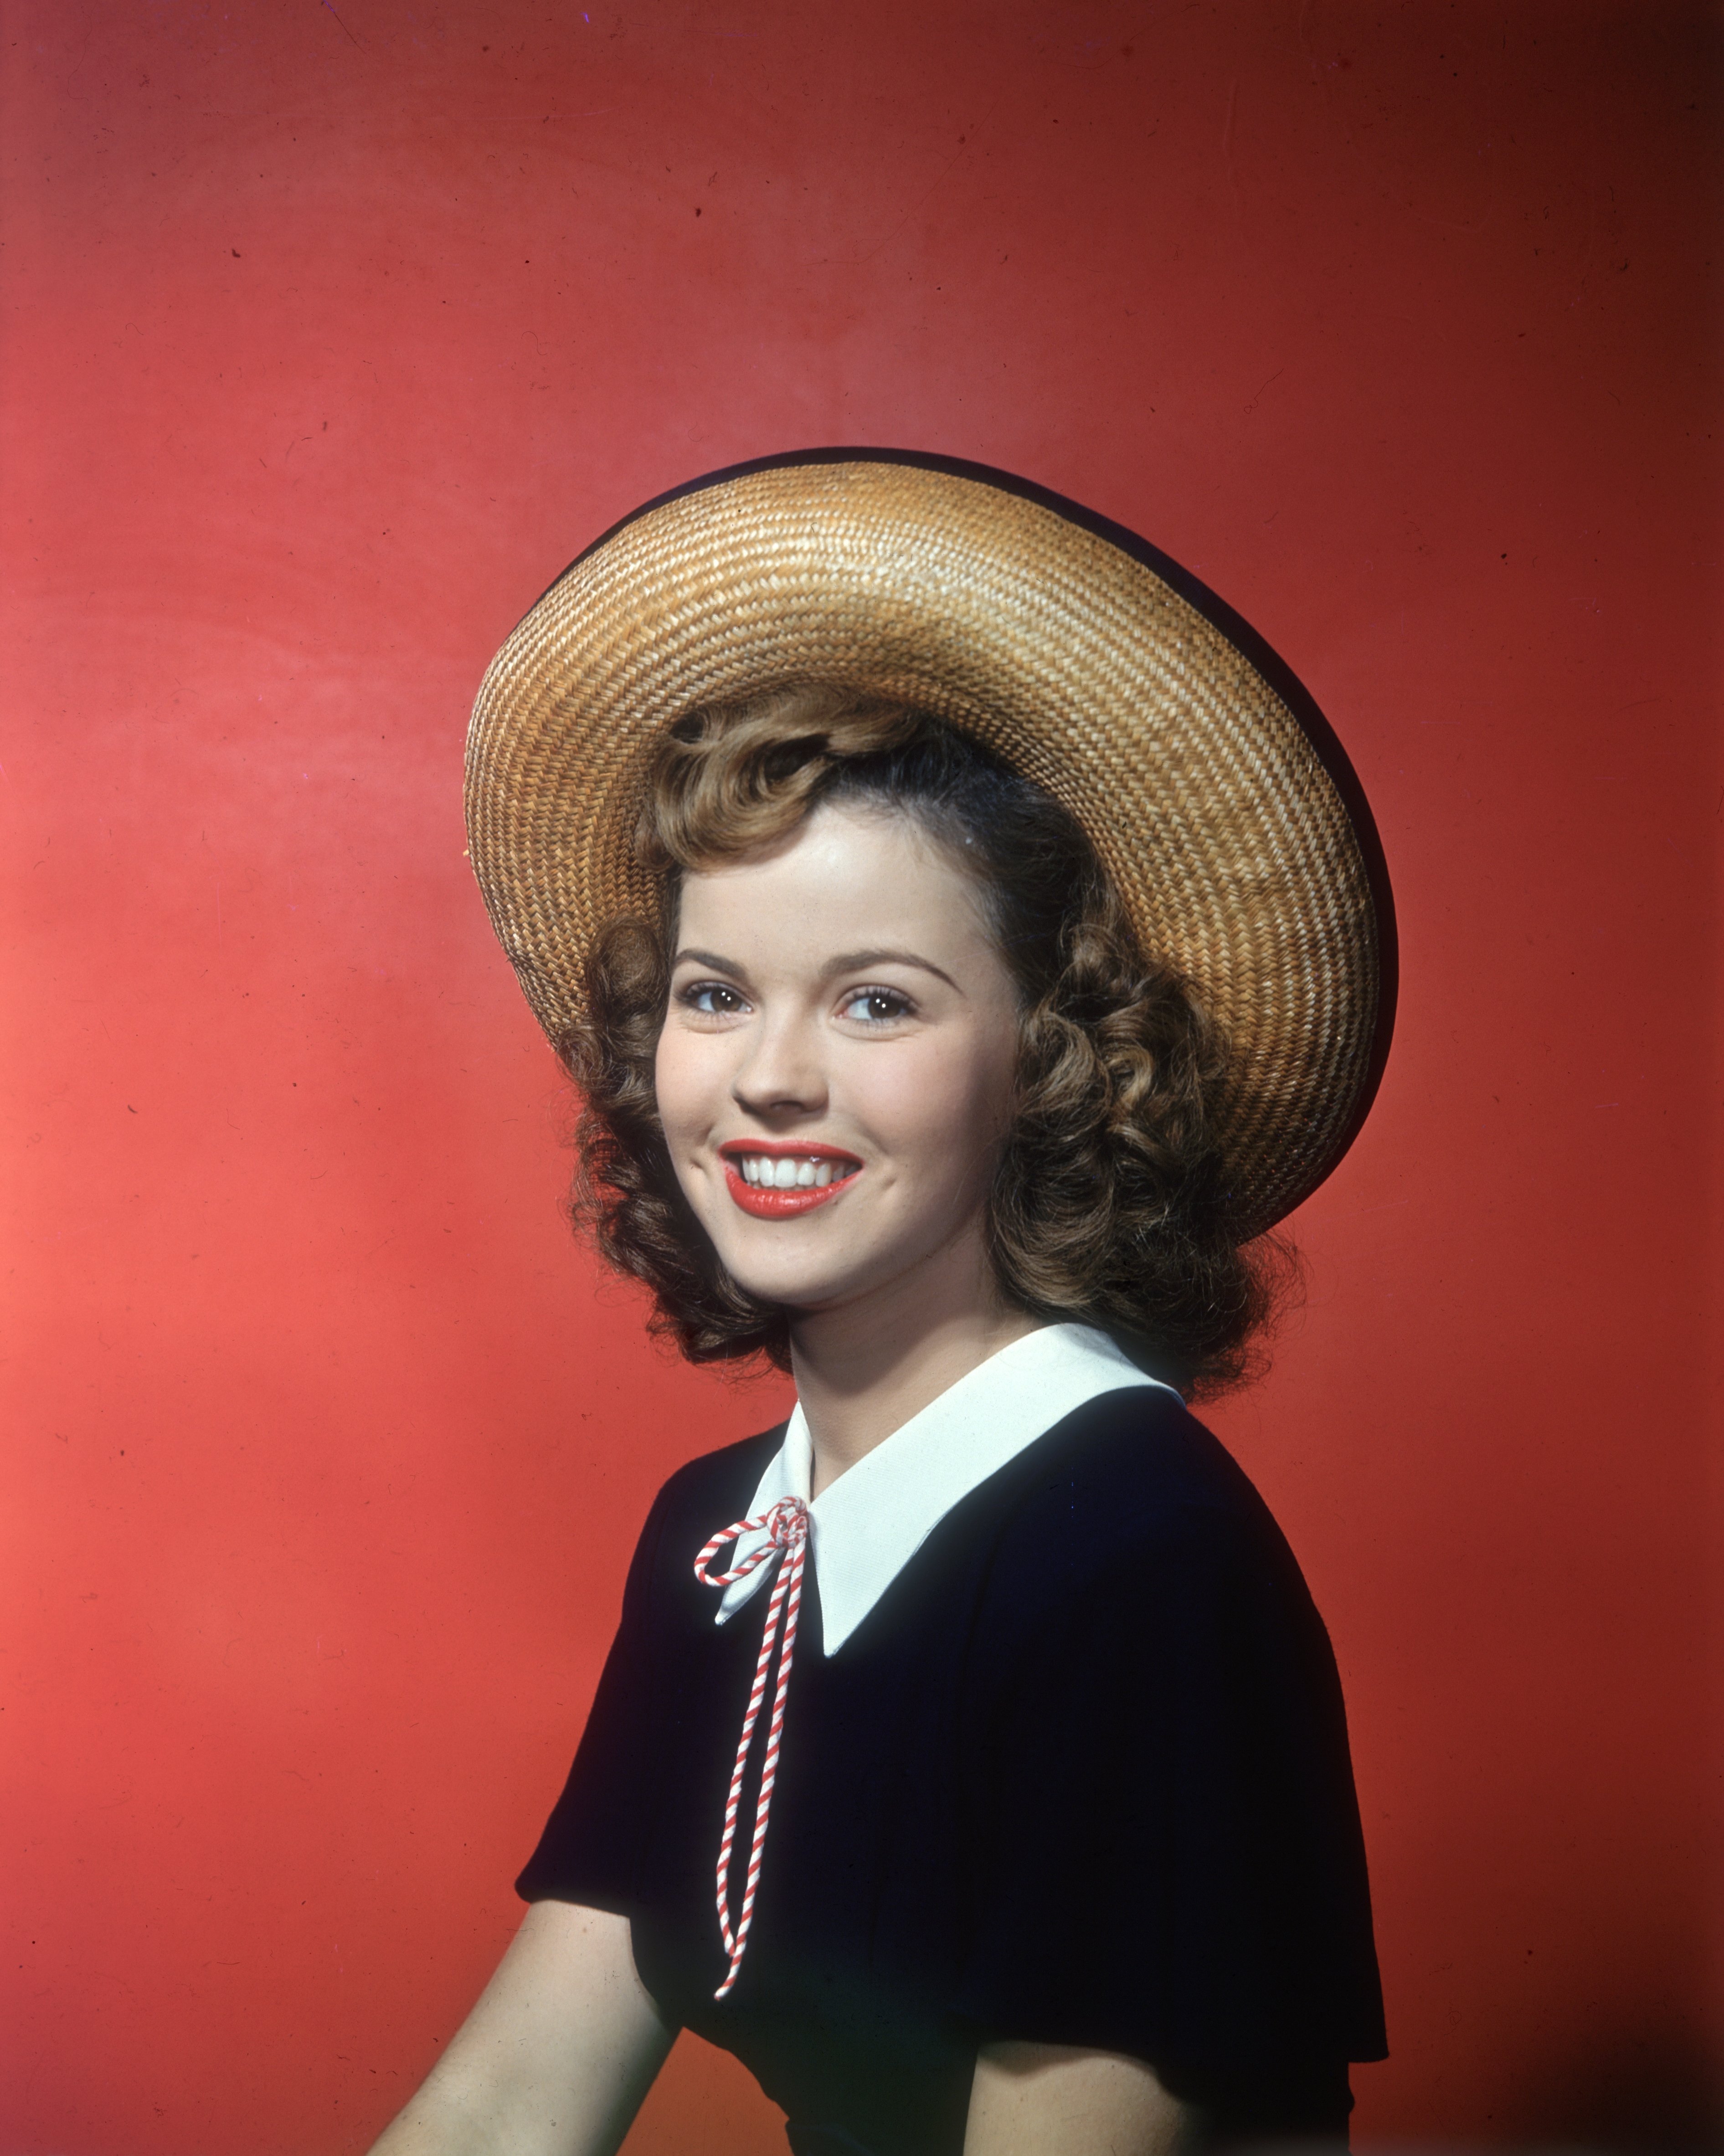  Smiling studio portrait of American actor Shirley Temple, sitting in front of a red backdrop, wearing a straw hat and black top with white collar. circa 1945 |Source: Getty Images